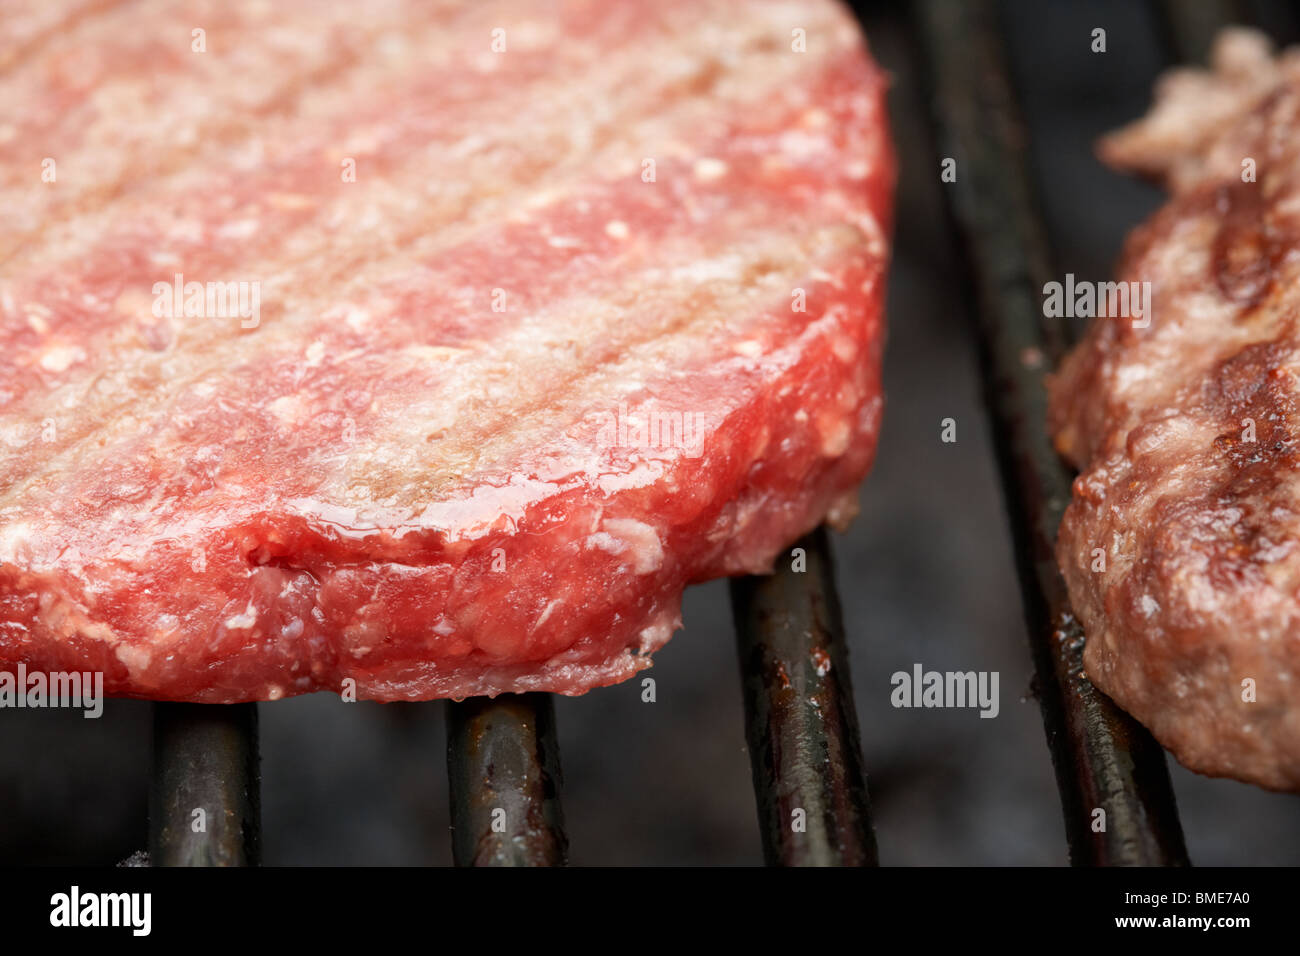 partially raw steak burgers cooking next to a cooked burger on a barbeque grill Stock Photo